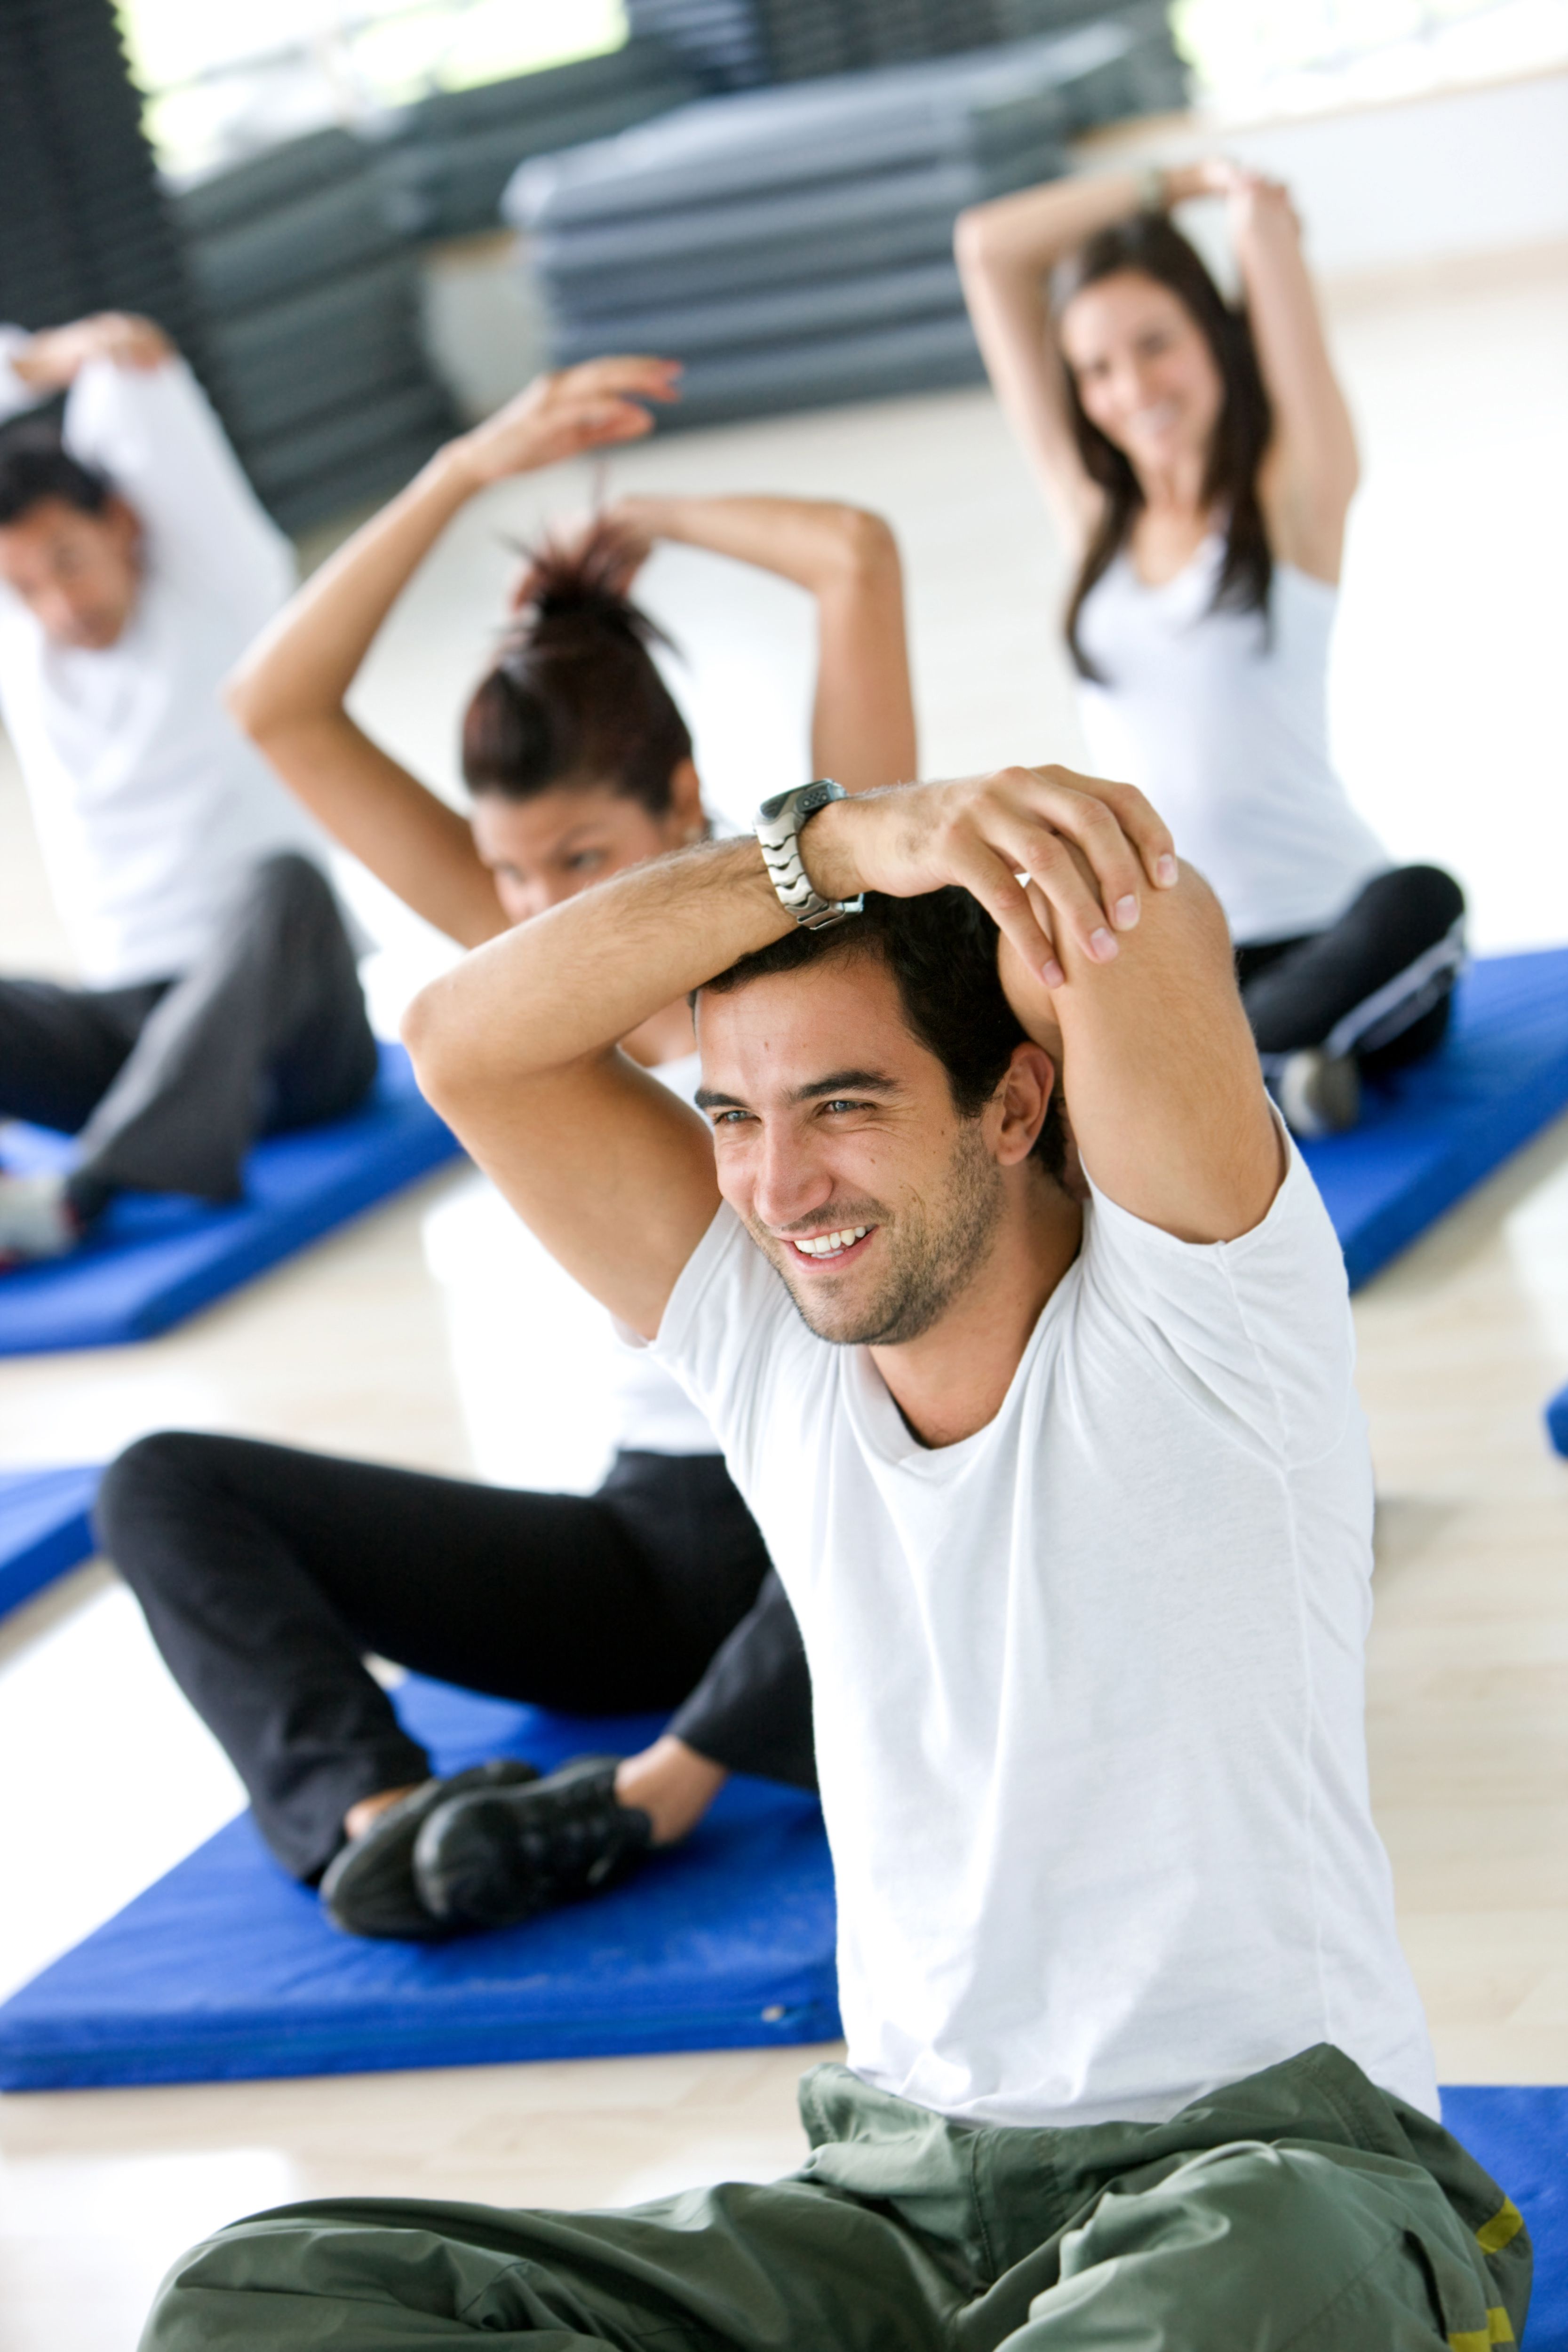 Group of gym people stretching at a gym